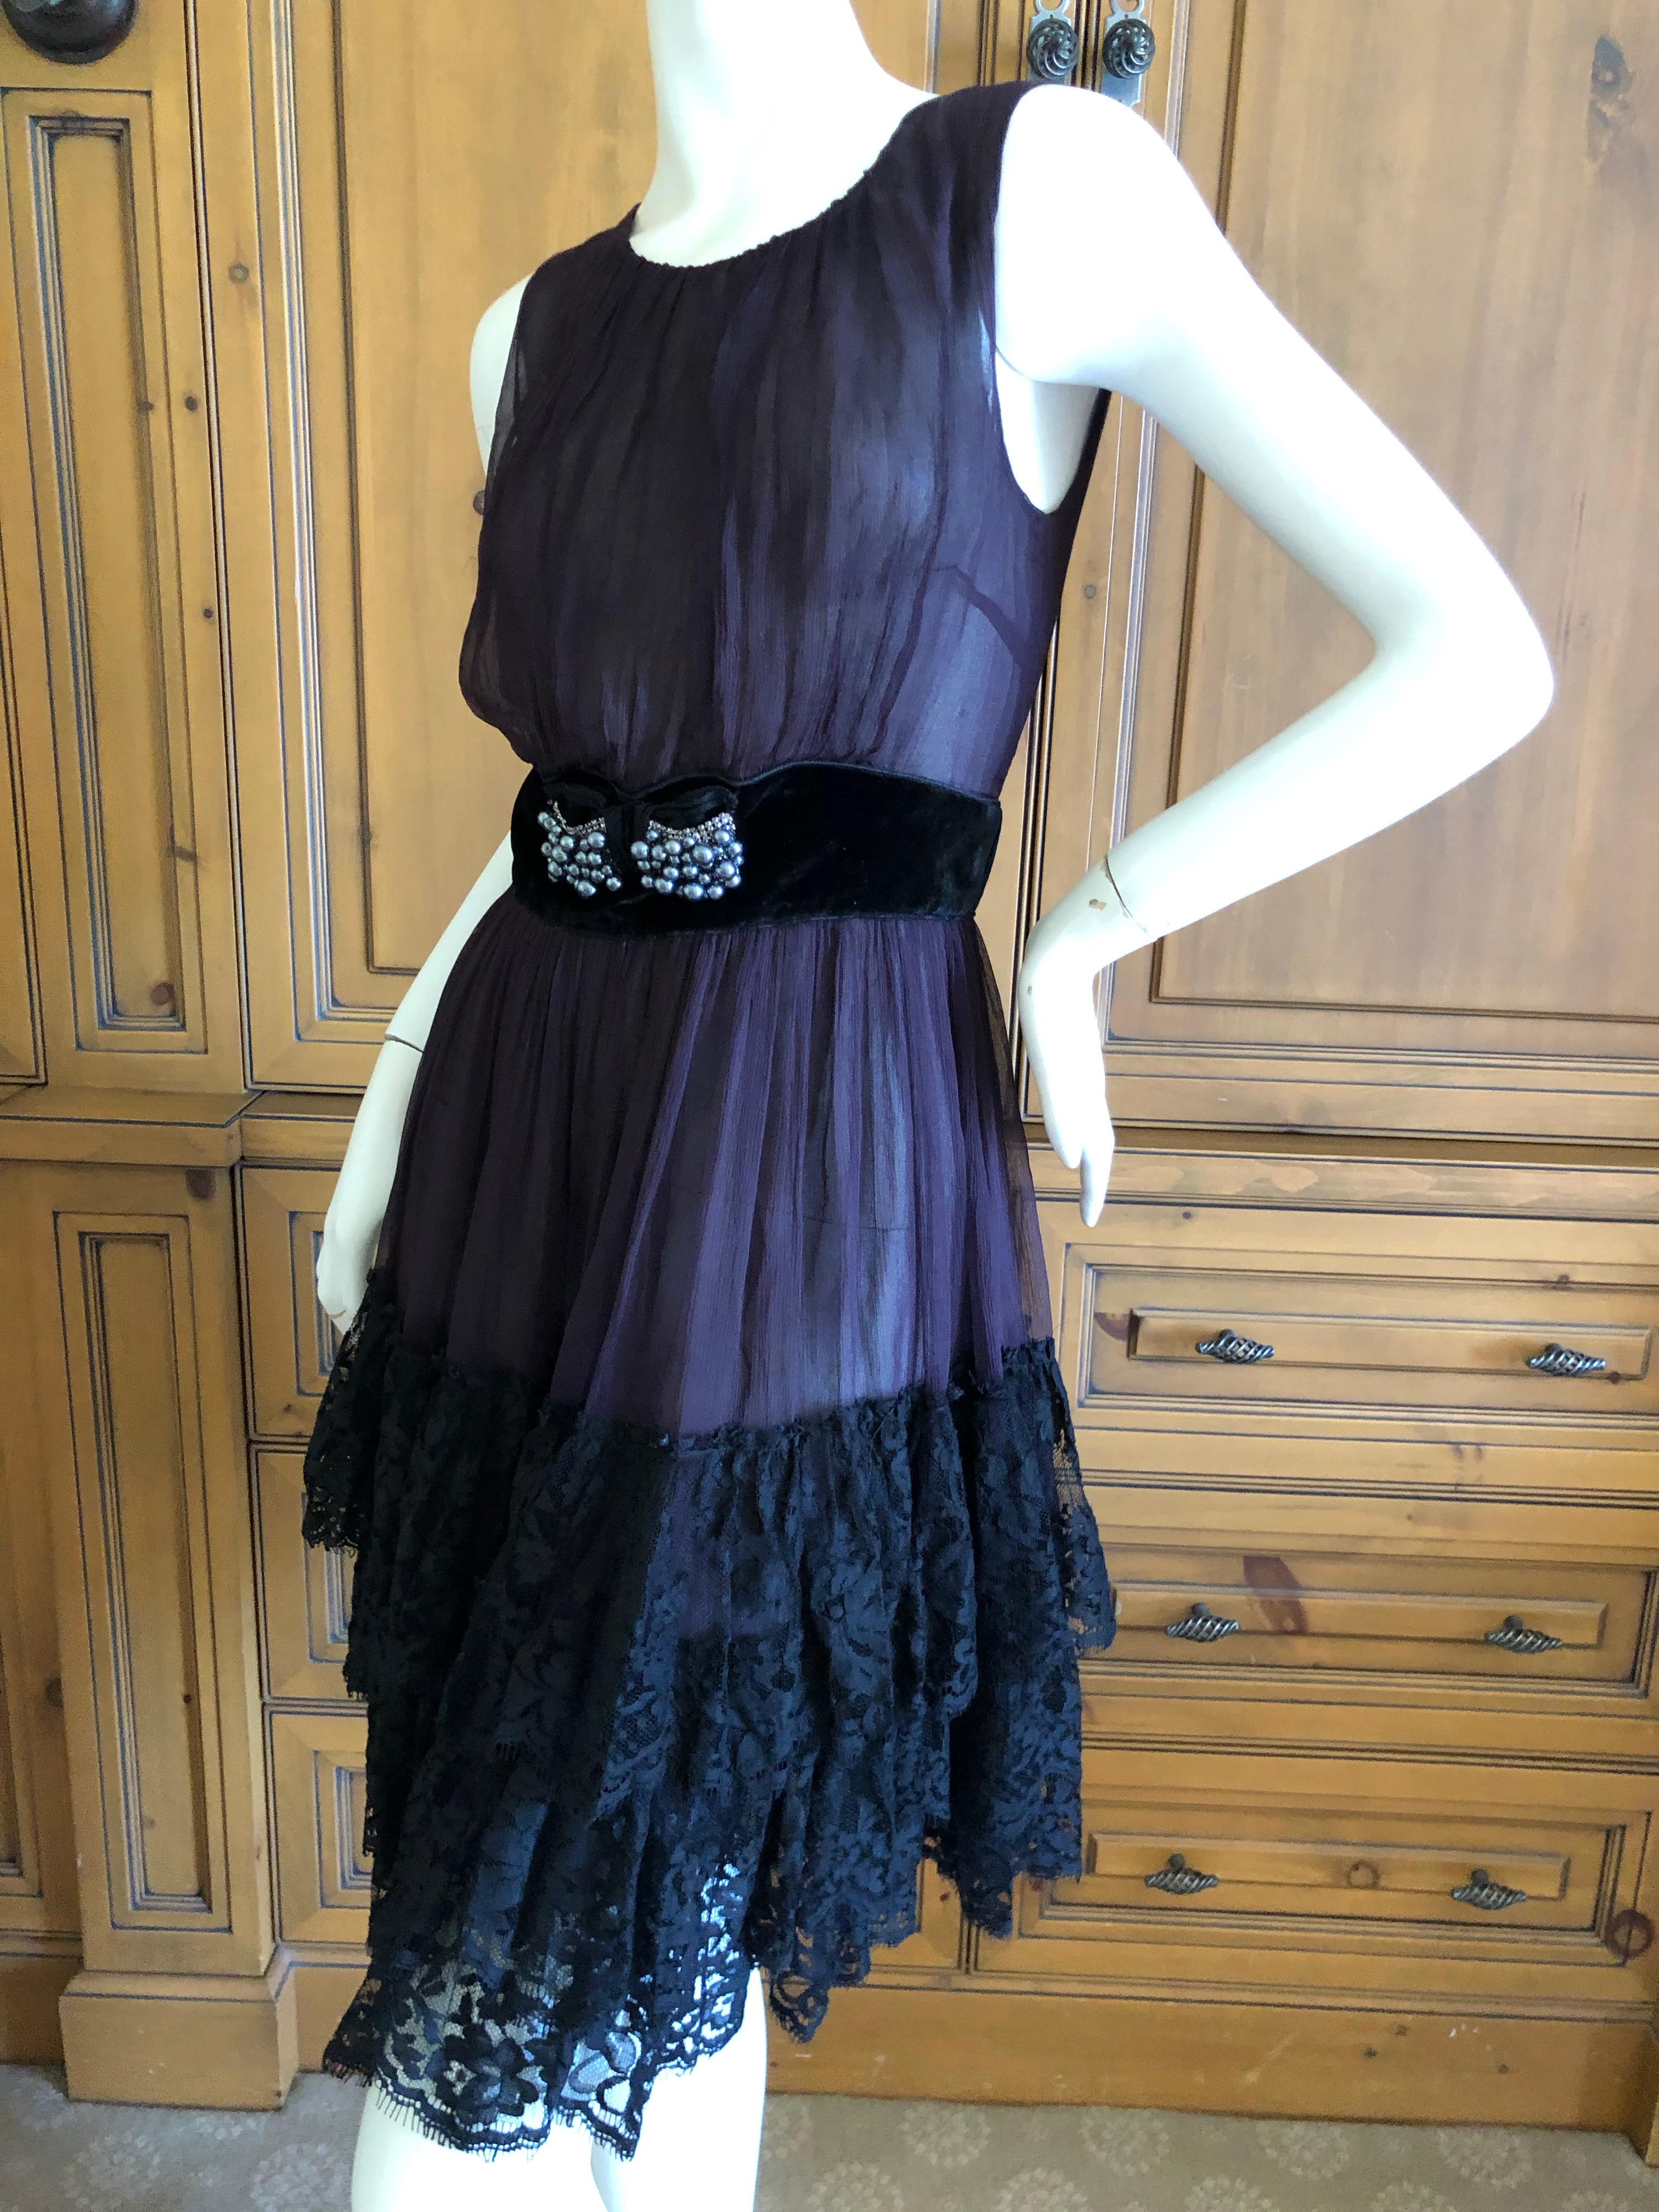 Dolce & Gabbana for D&G Vintage Sheer Tiered Silk Lace Dress with Pearl Accents In Excellent Condition For Sale In Cloverdale, CA